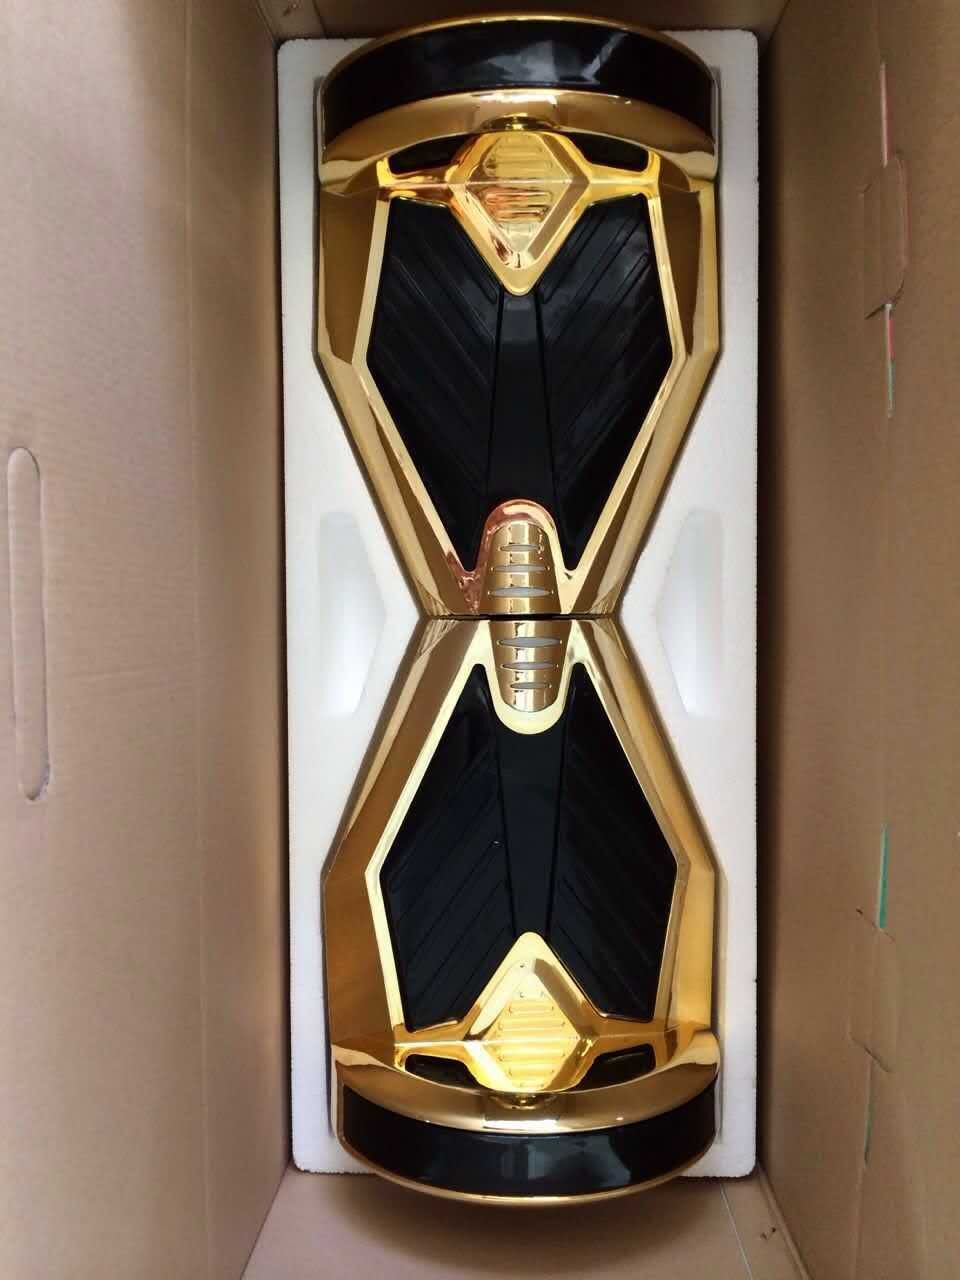 Lambo hoverboard Balance scooter chrome gold 2 wheel hoverboard 8inch 